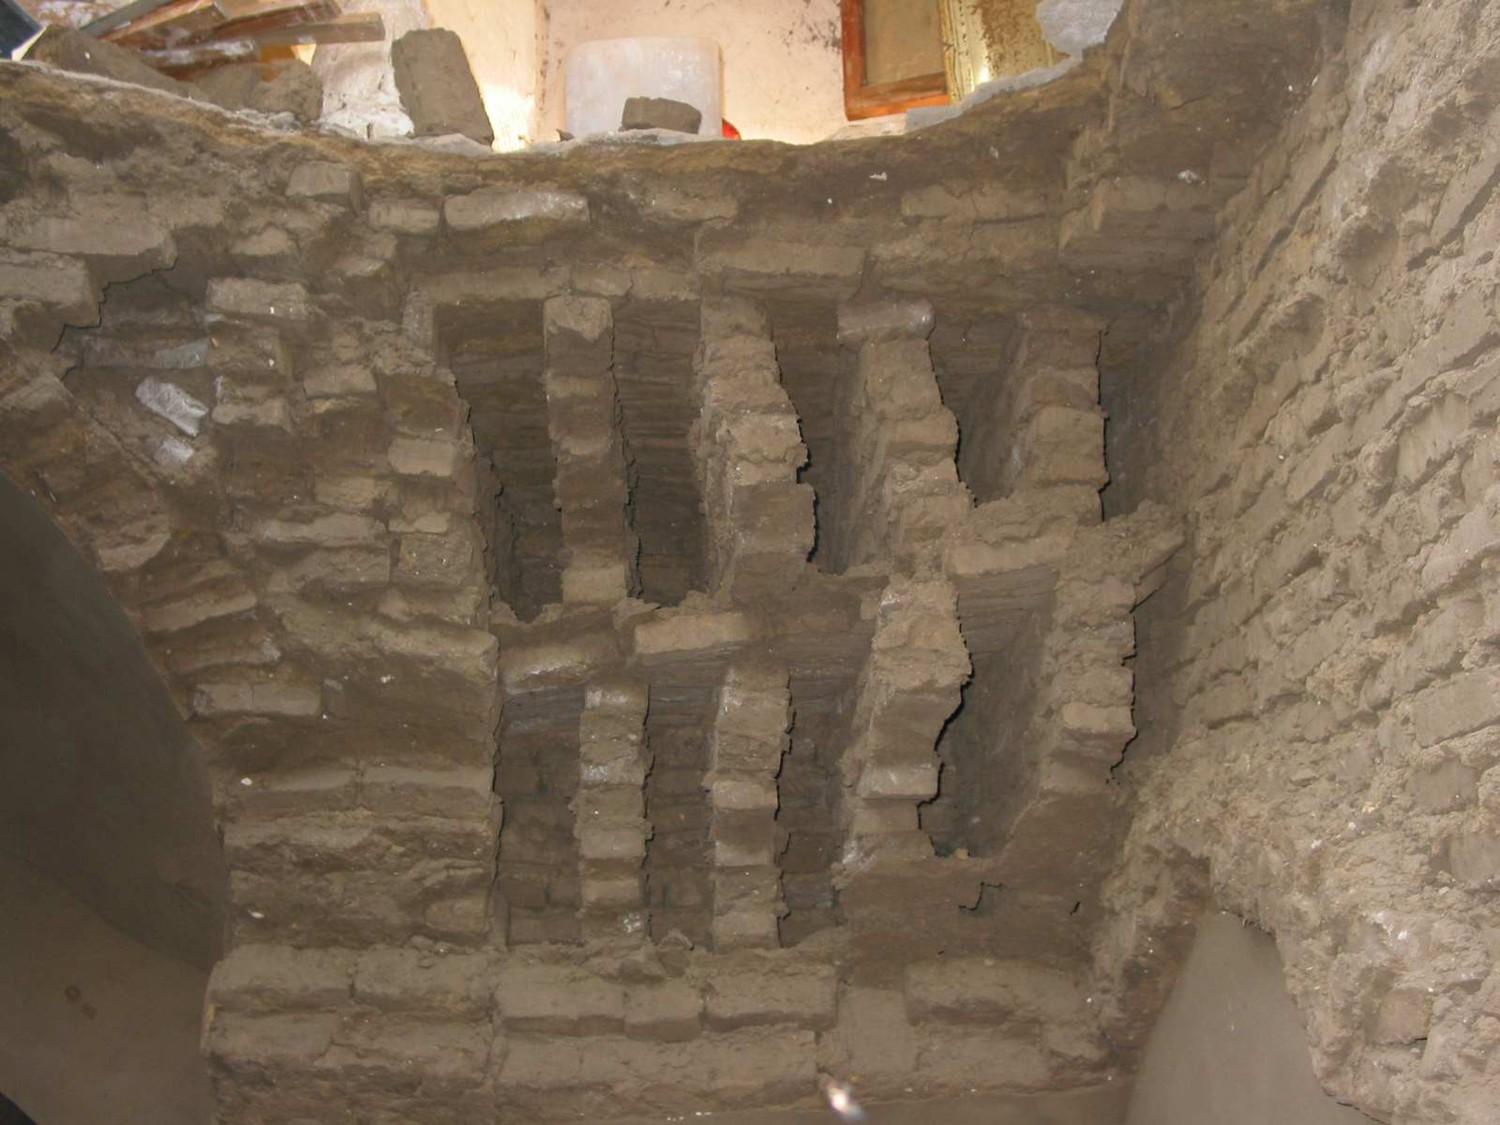 Cross section of dome infill visible after collapse